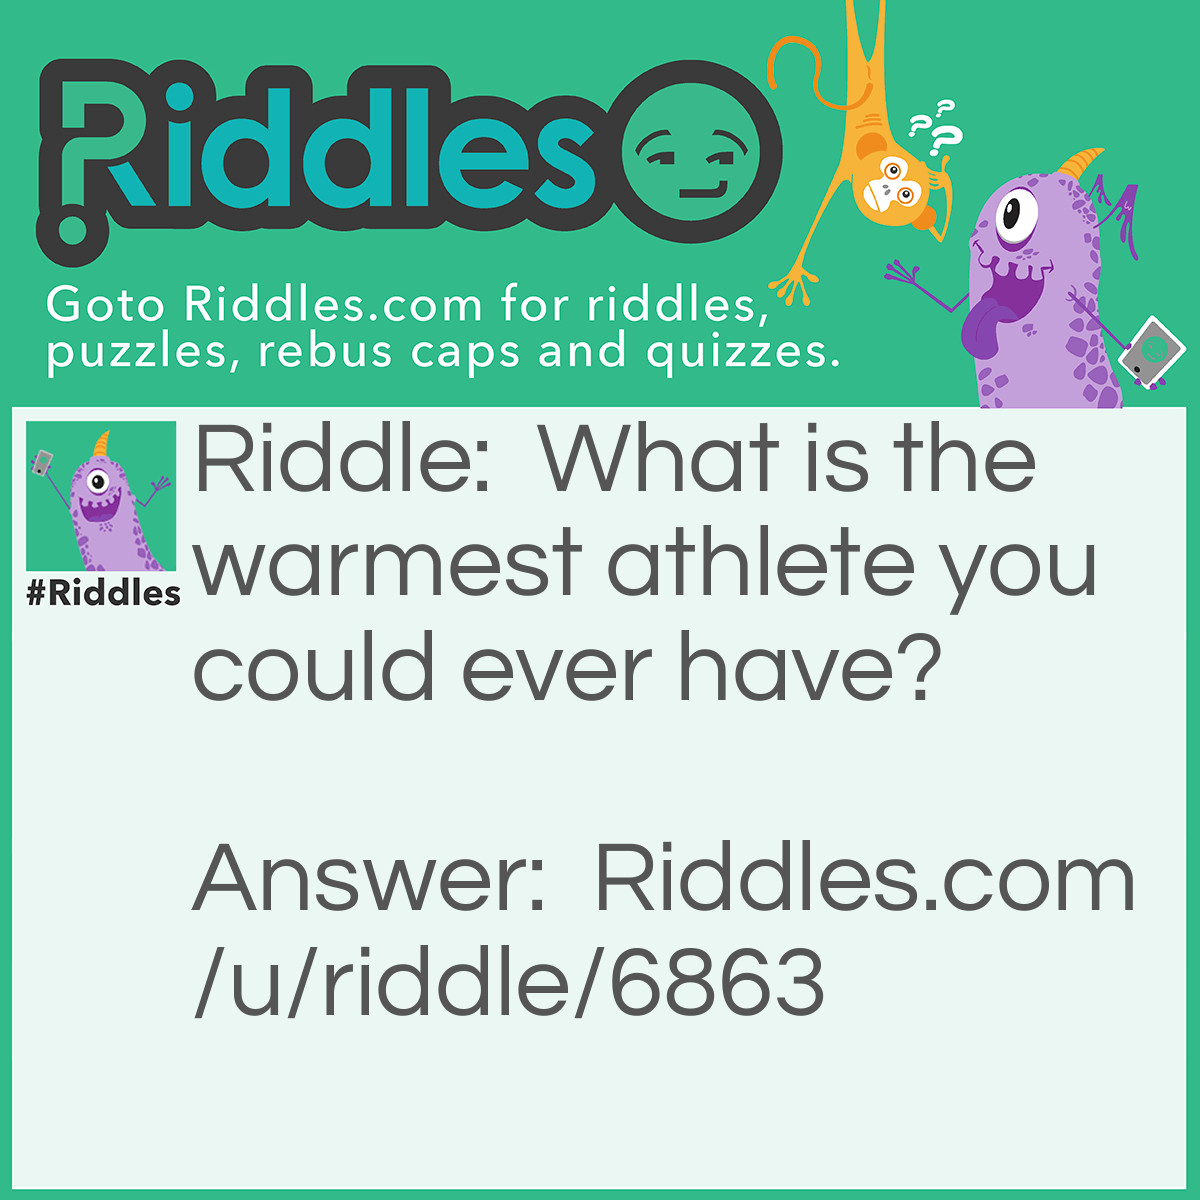 Riddle: What is the warmest athlete you could ever have? Answer: A long jumper.